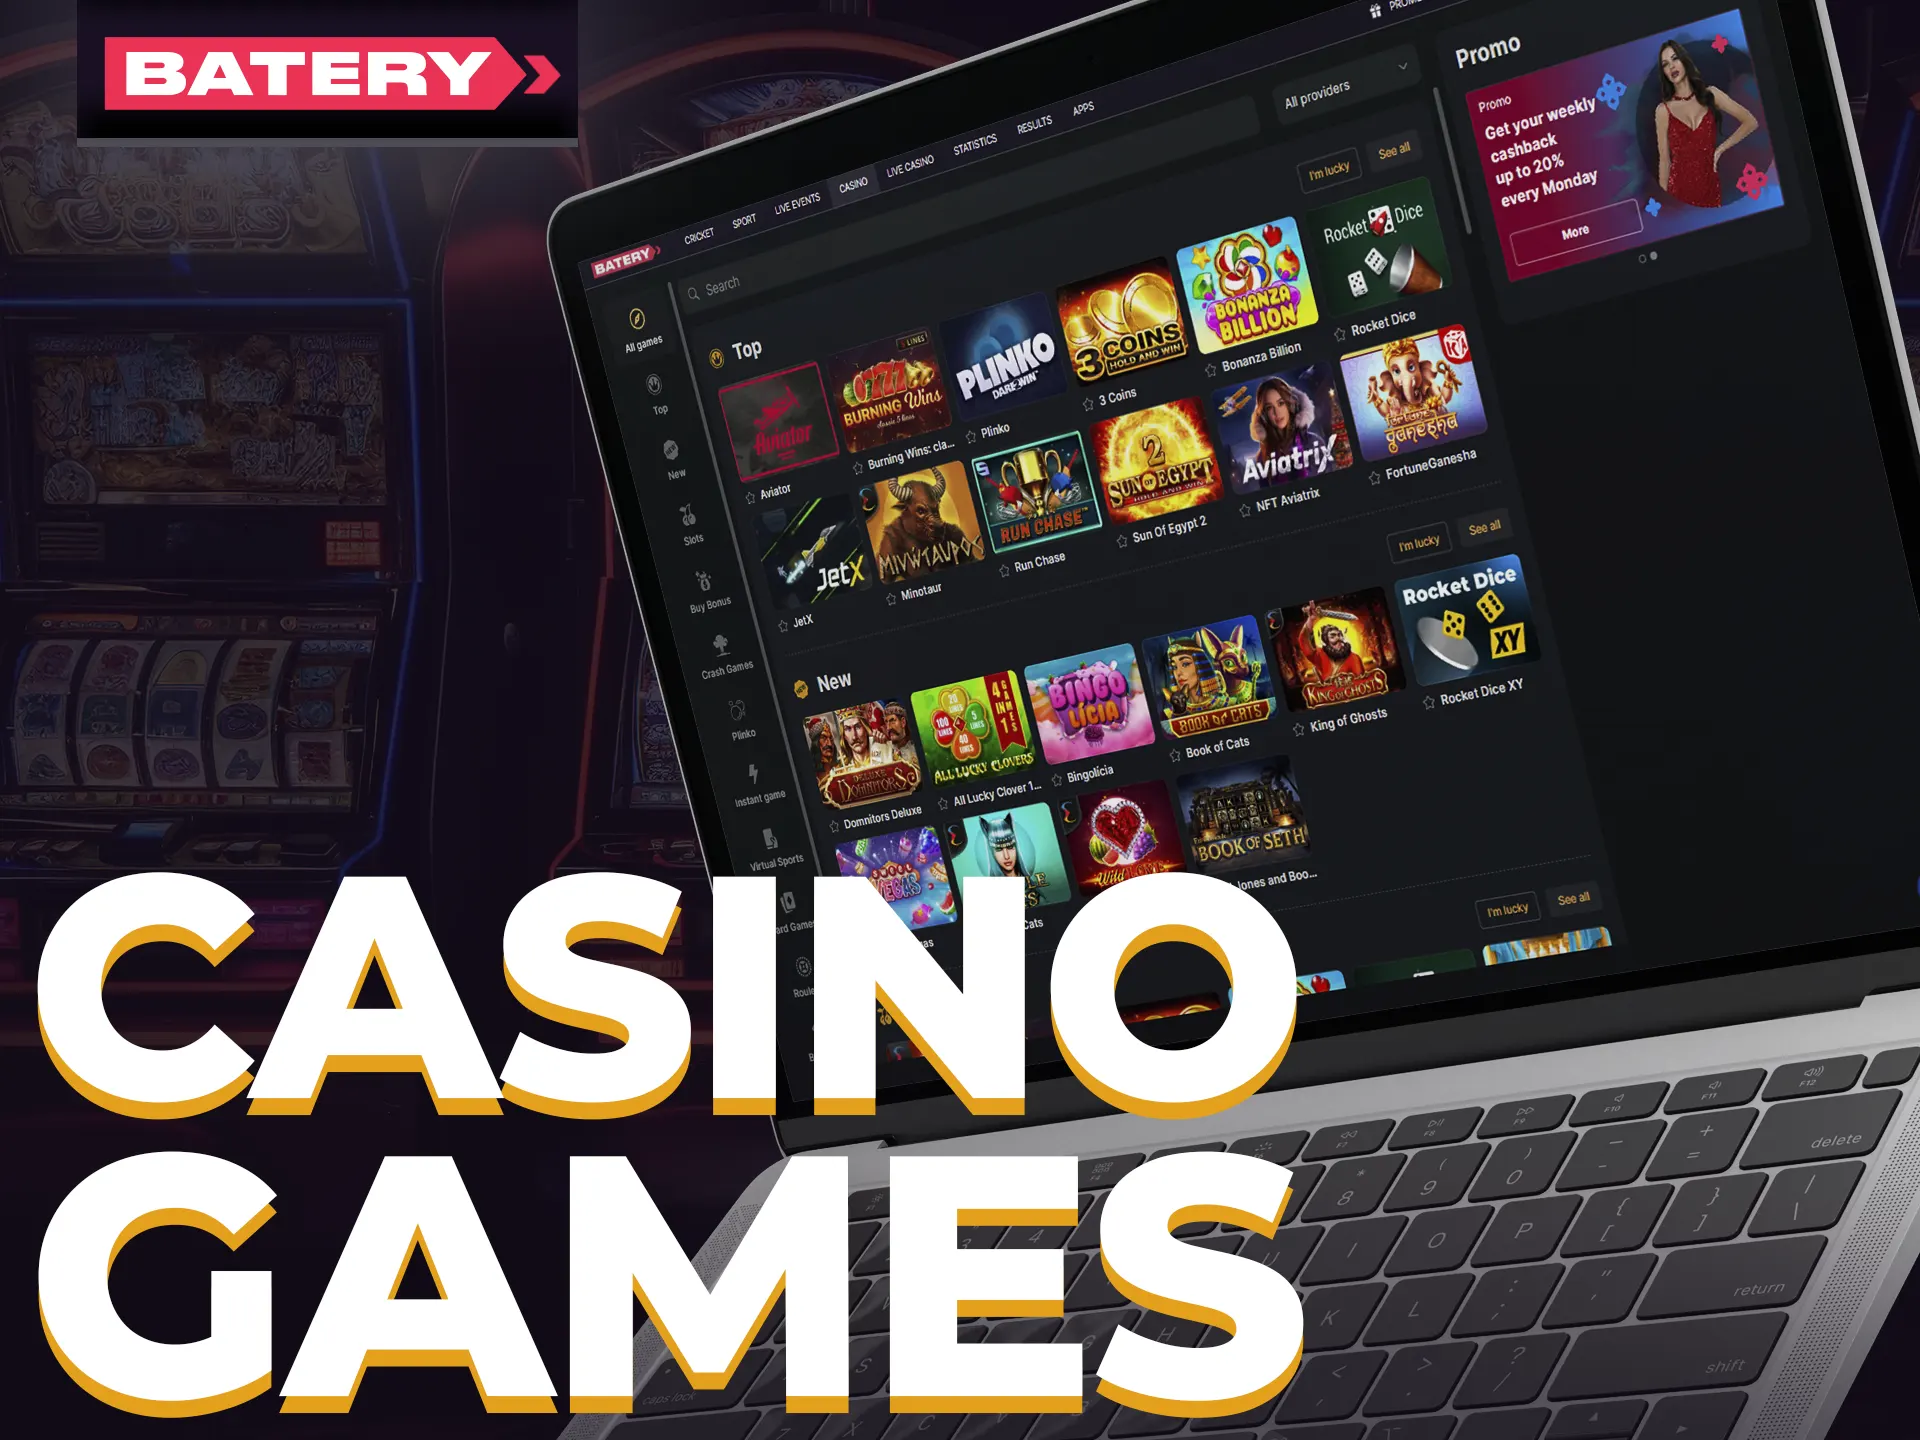 Batery Casino boasts 5,000+ unique games, including novelties, popular machines, and card entertainment.